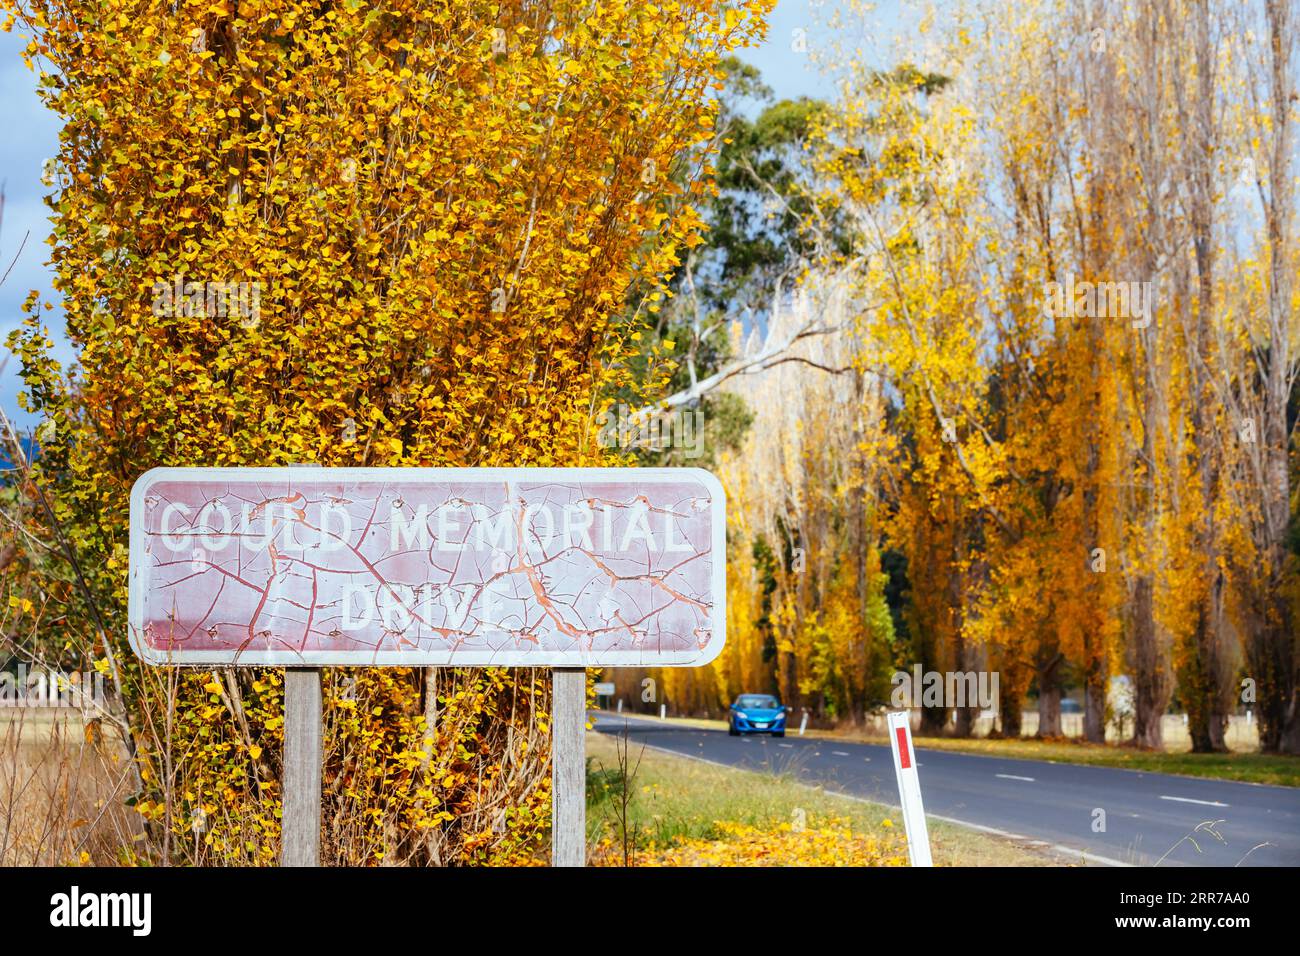 The iconic Gould Memorial Drive in autumn colours on the Buxton-Marysville Rd near the country town of Marysville in Victoria, Australia Stock Photo